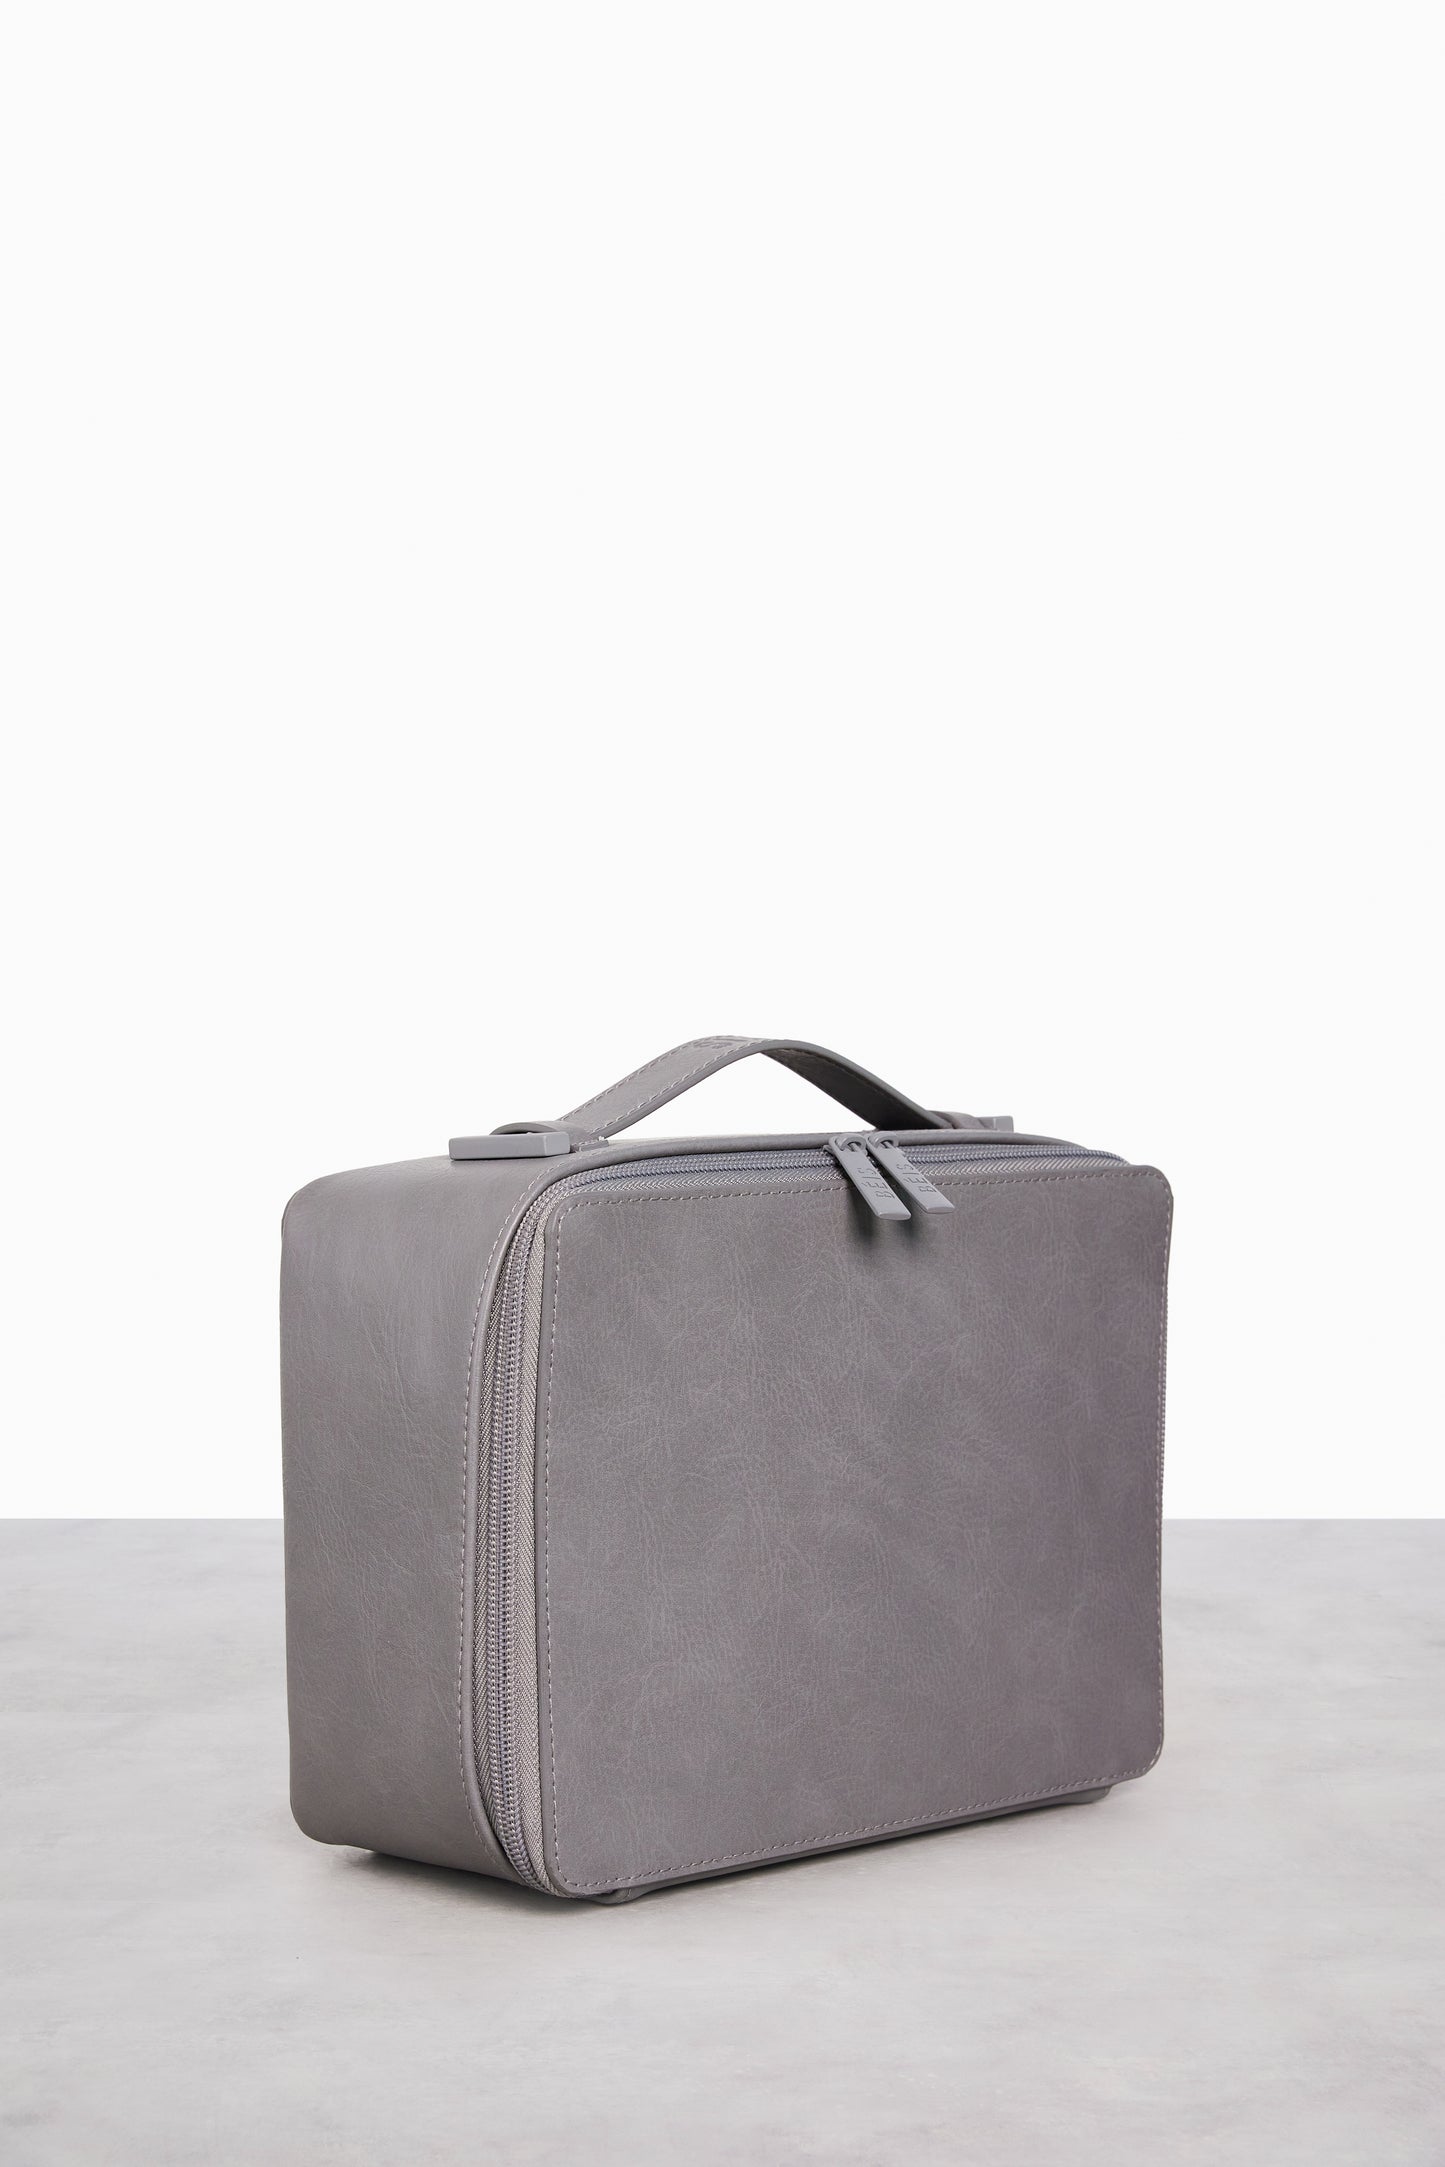 The Cosmetic Case in Grey